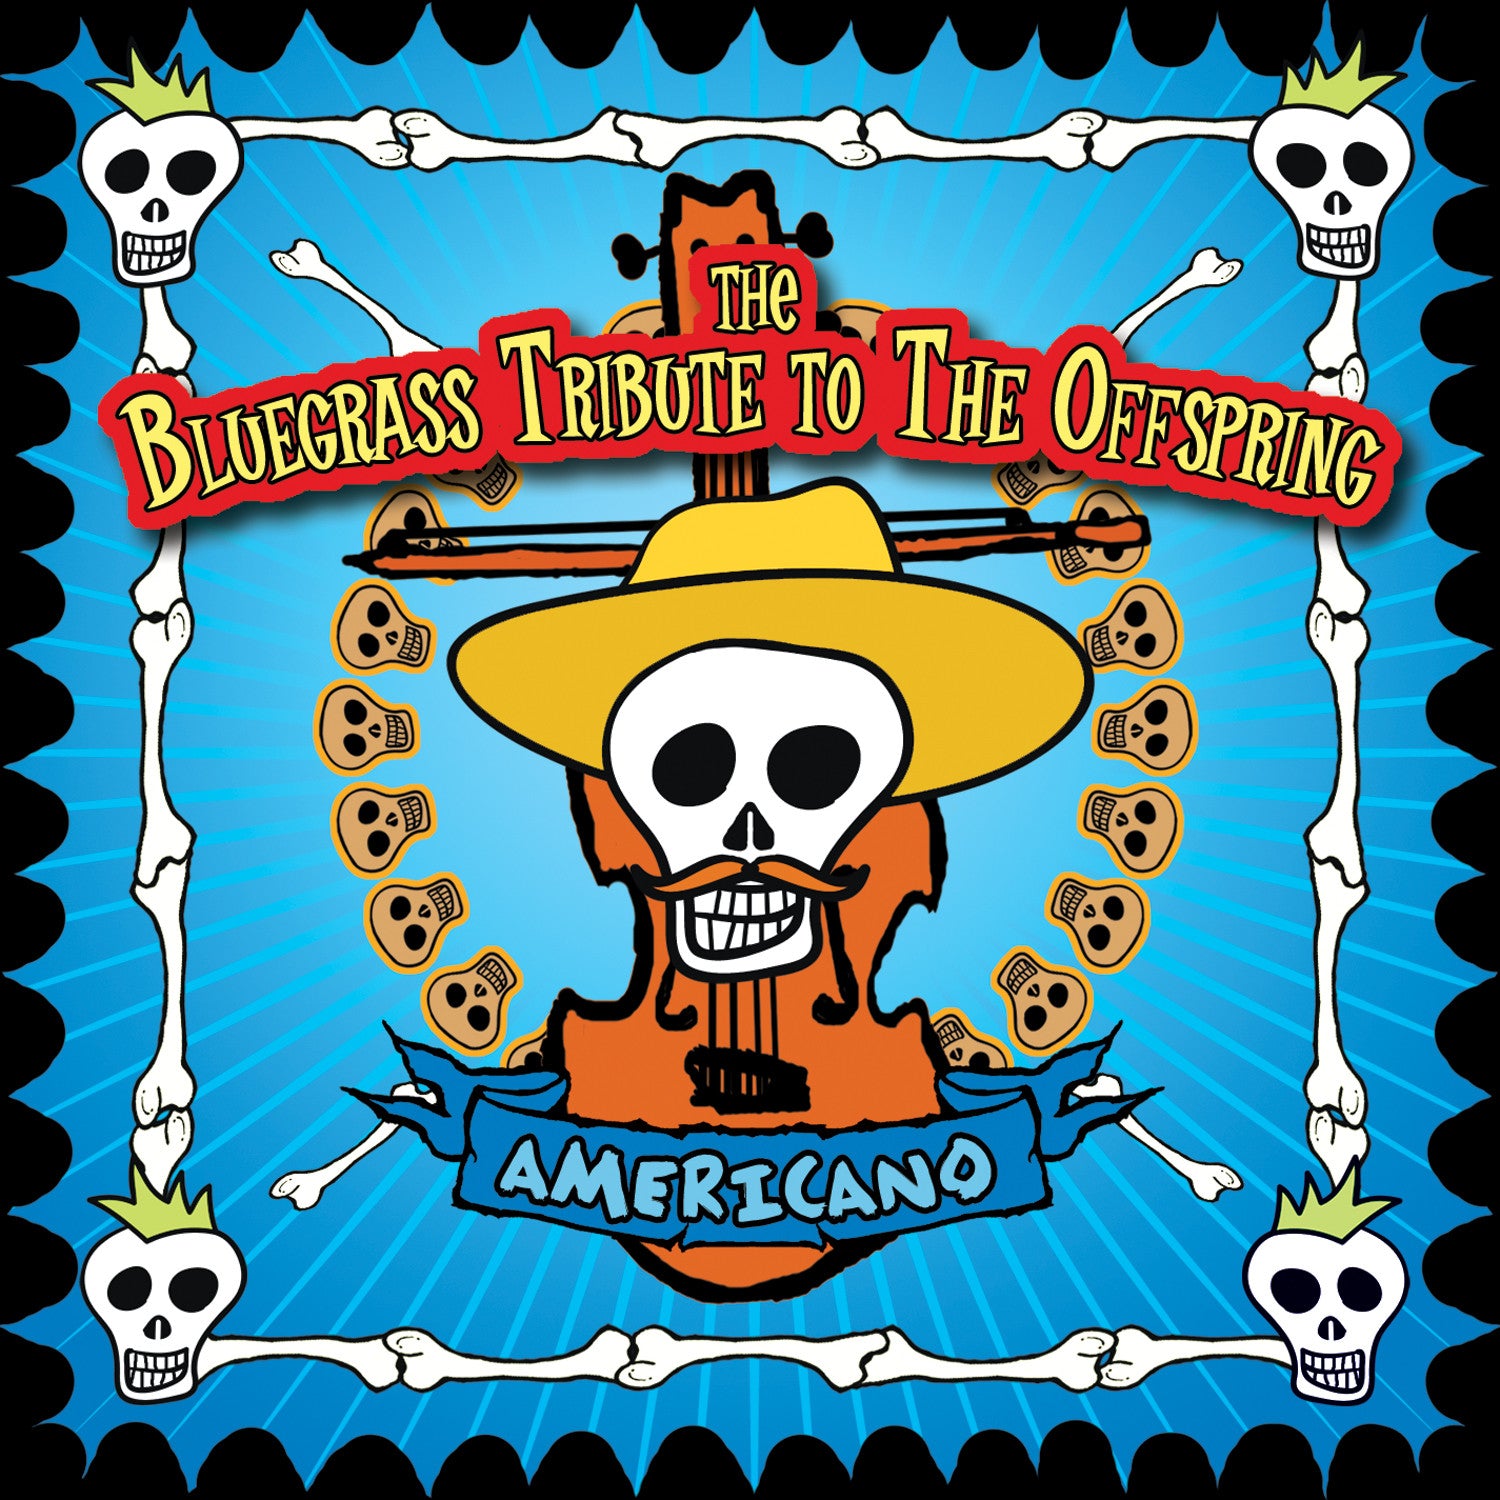 Americano: The Bluegrass Tribute to The Offspring